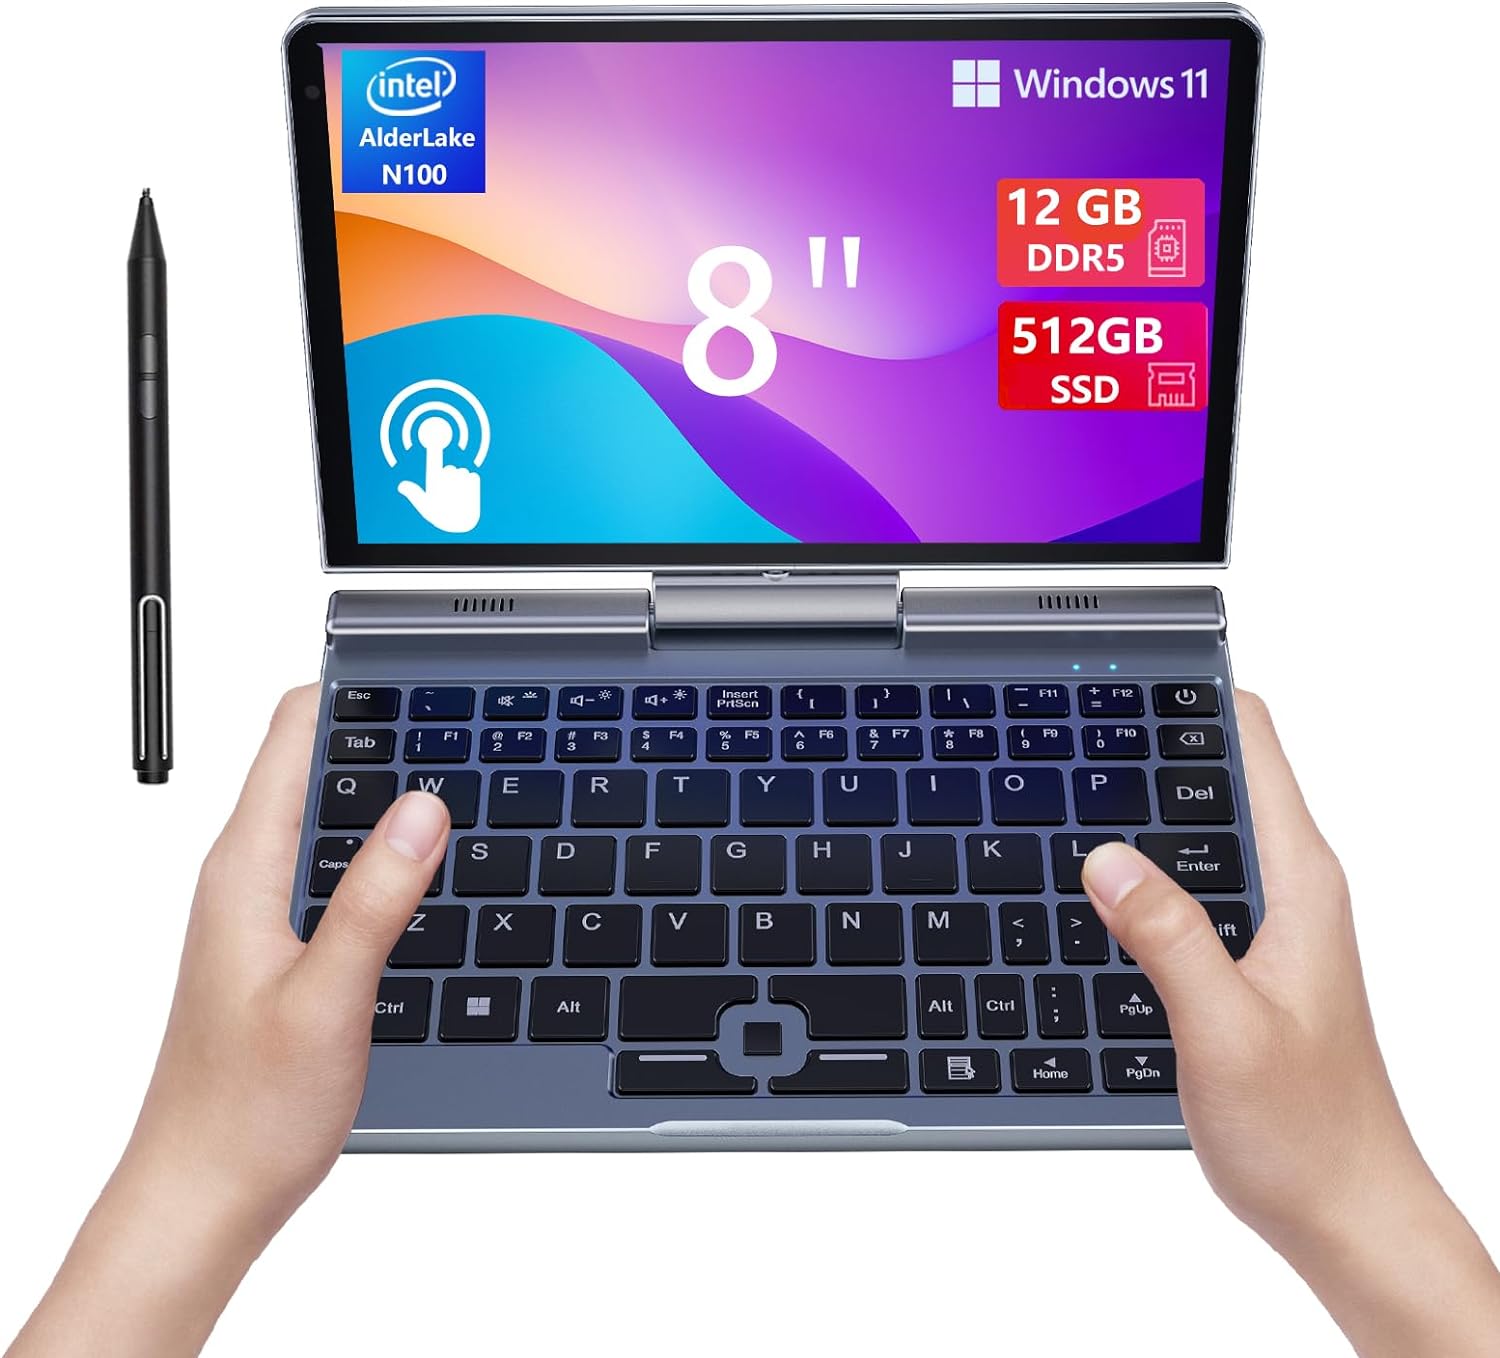 8 inch Mini Laptop HD Touchscreen Portable 2-in-1 Small Computer, Windows 11 Pro Laptop for Business and Students,Intel N100 12GB LPDDR5 512GB M.2 SSD,Wi-Fi 6，BT5.2 2MP Camera，G-Sensor，HDMI，Type C